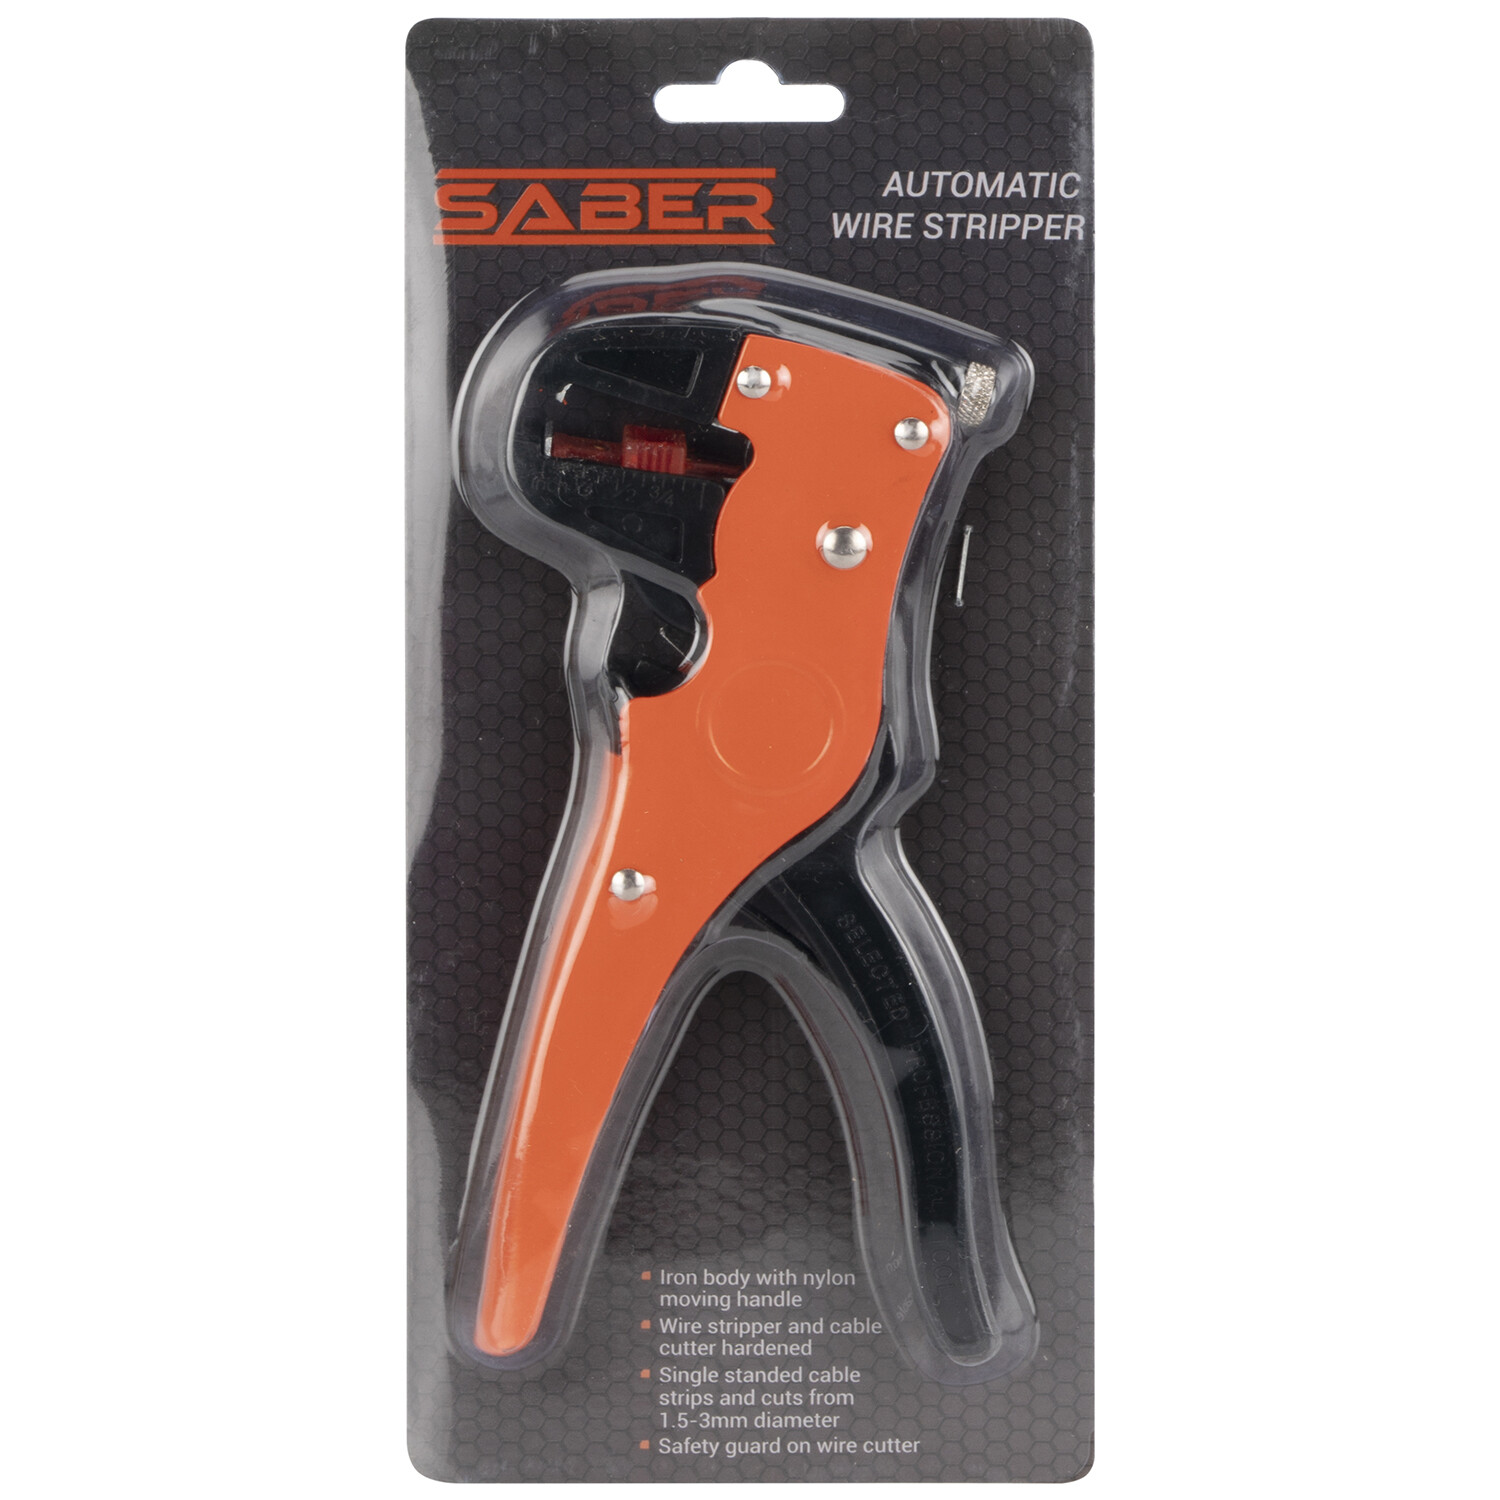 Saber Automatic Wire Stripper And Cable Cutter Image 1